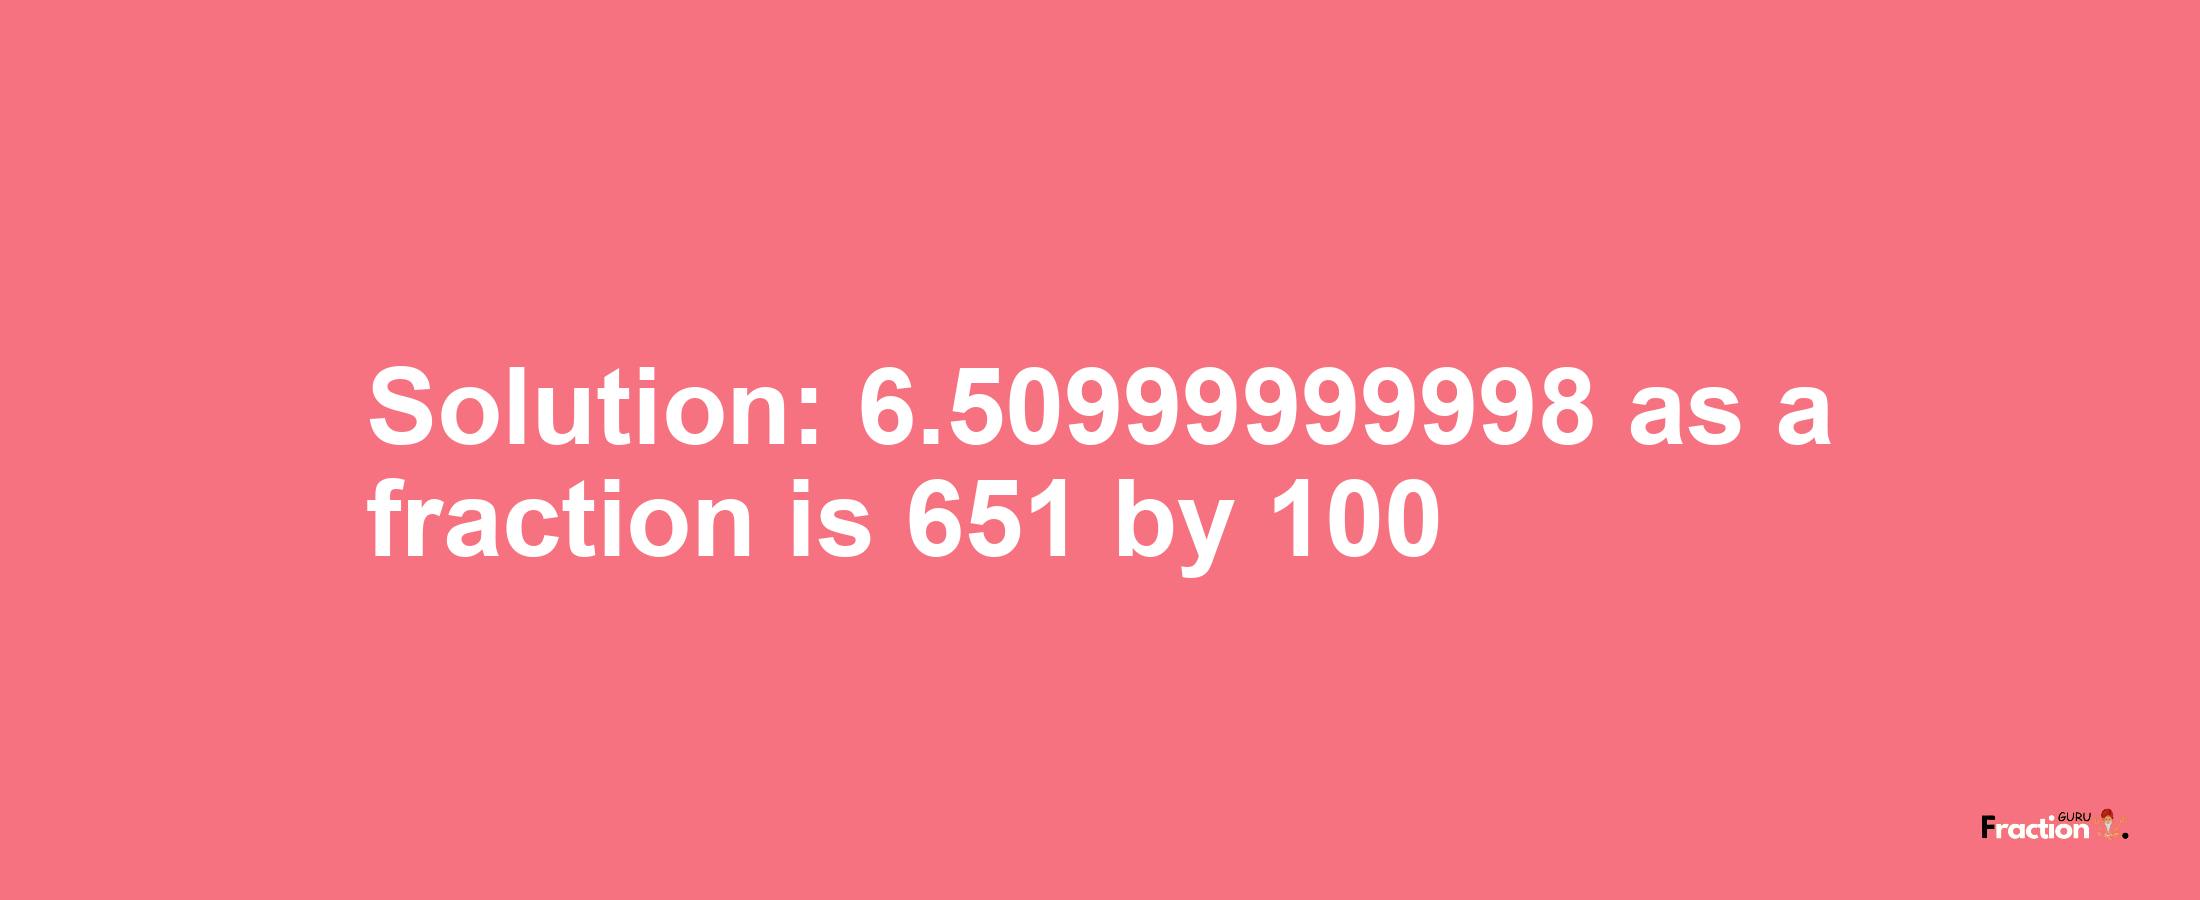 Solution:6.50999999998 as a fraction is 651/100